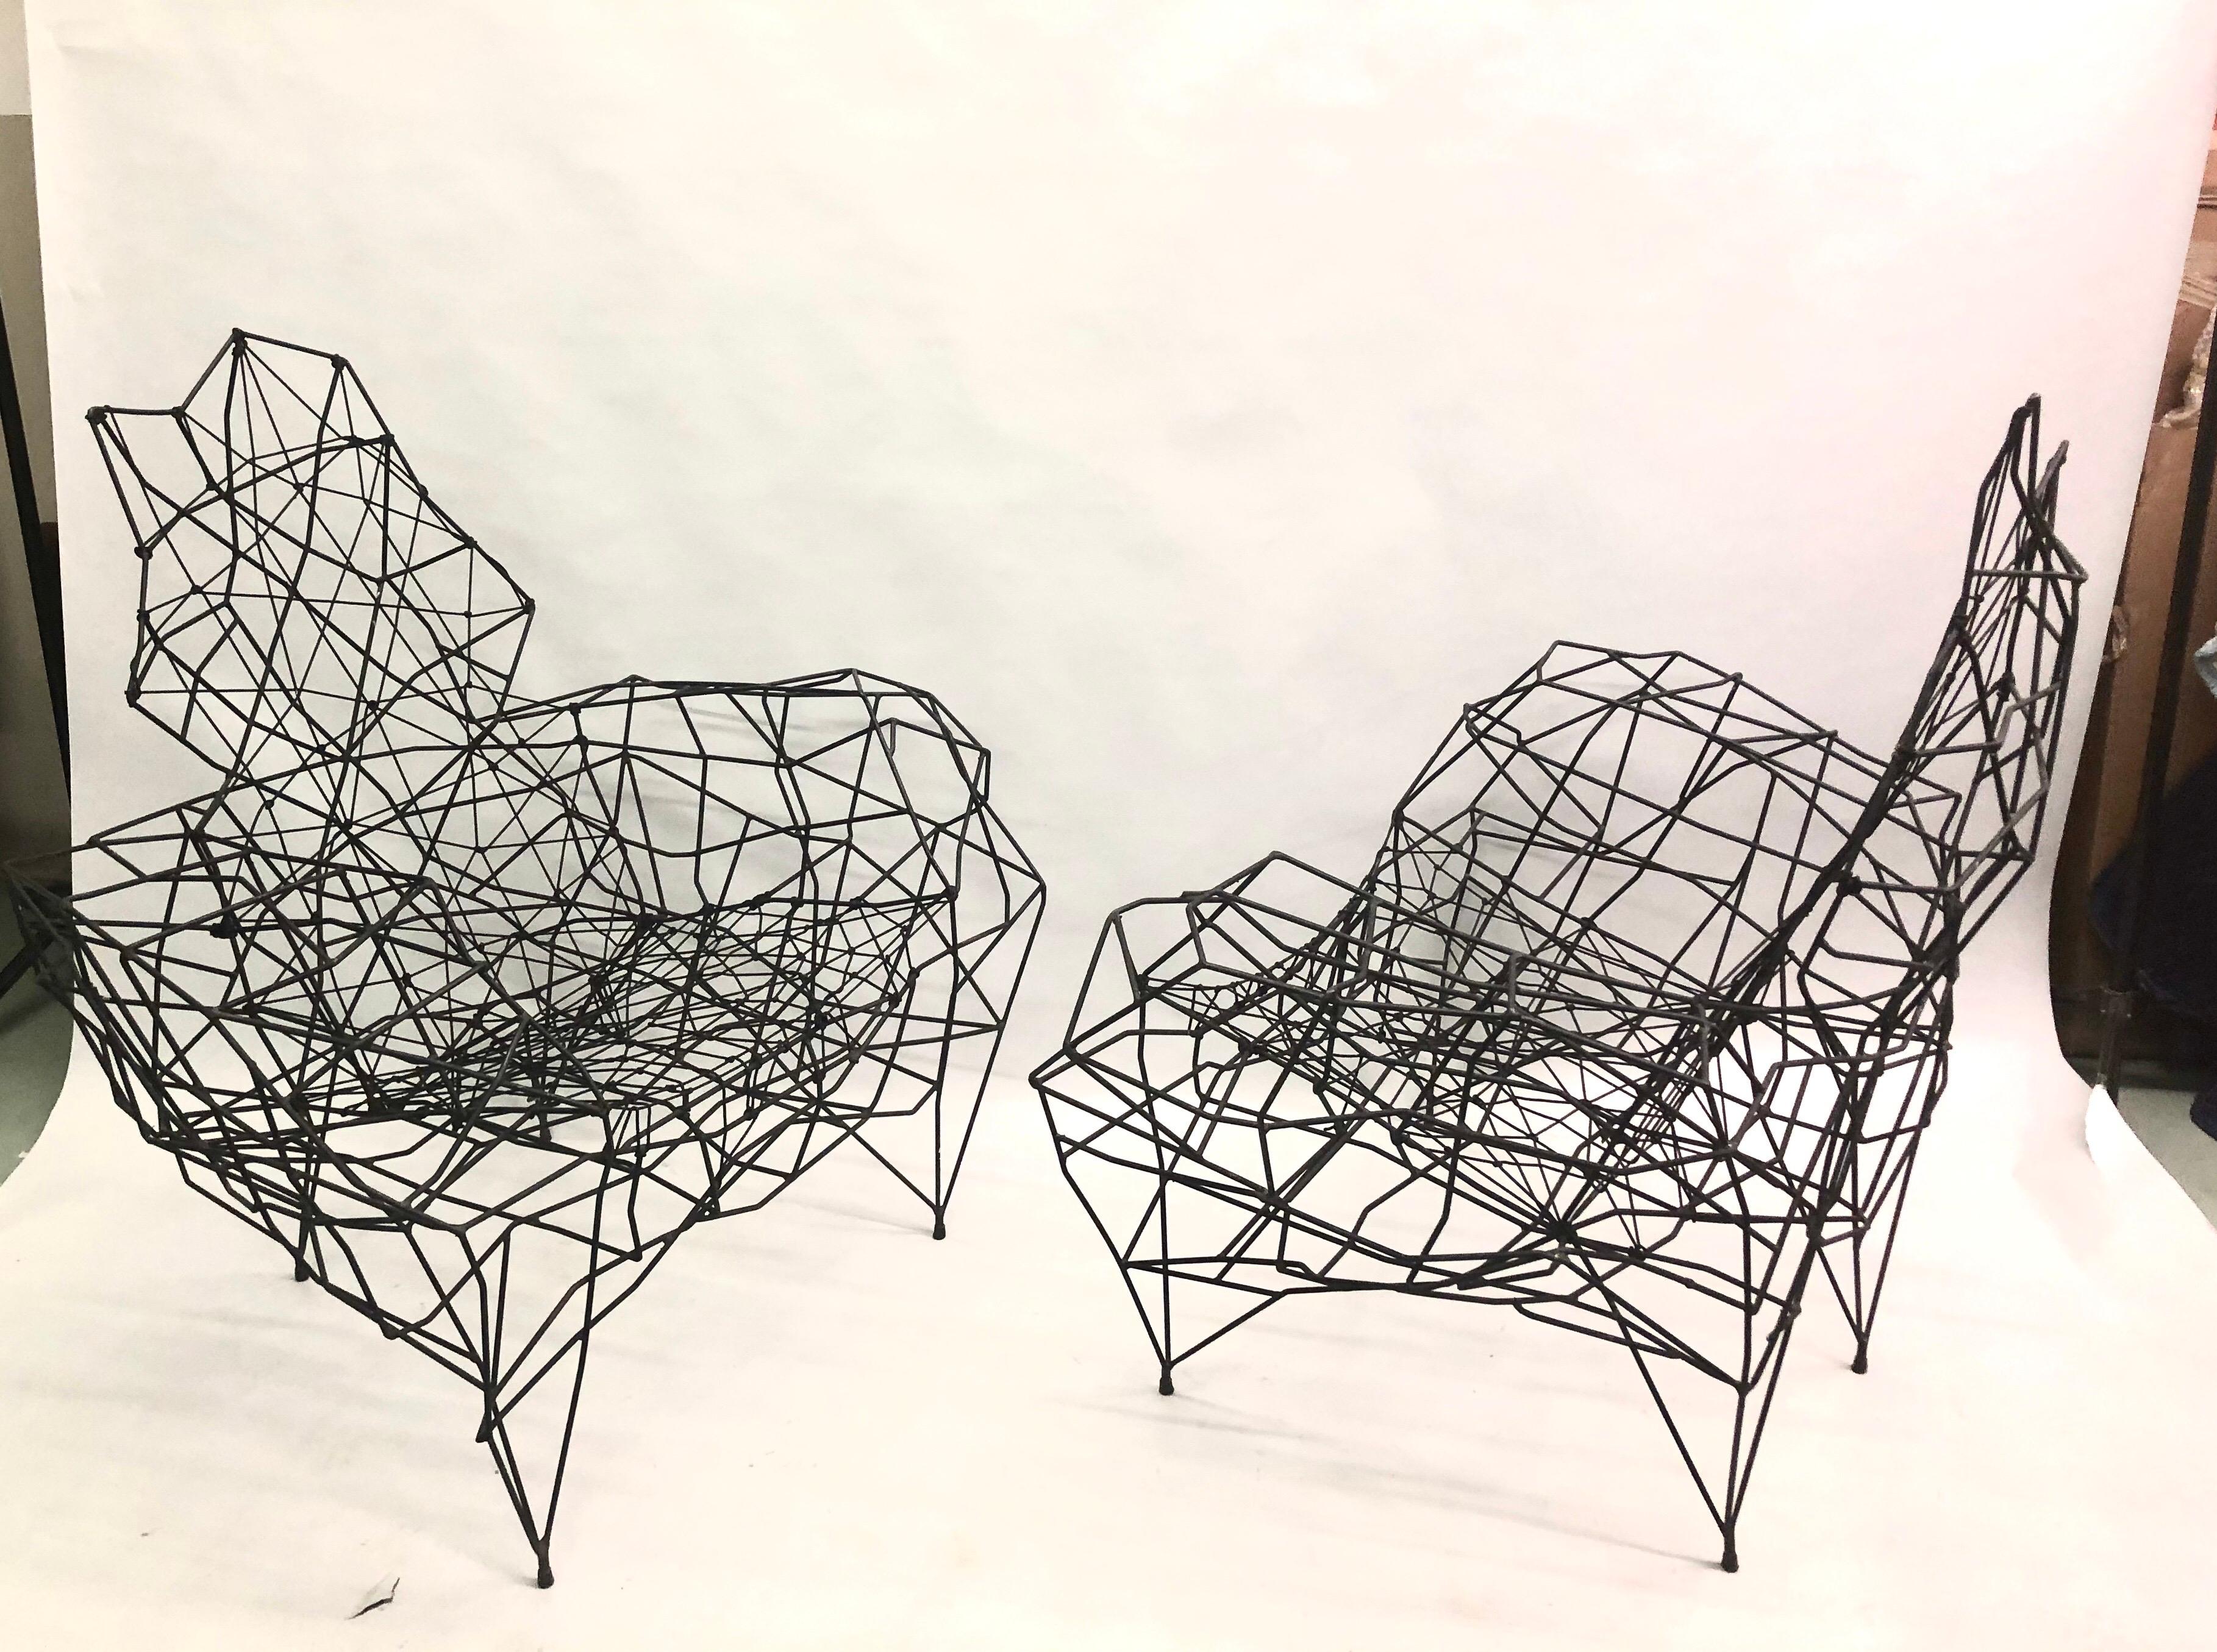 Metalwork Large French Artist Wrought Iron, Wire & Nylon Sculpture Lounge Chair, Ron Arad For Sale